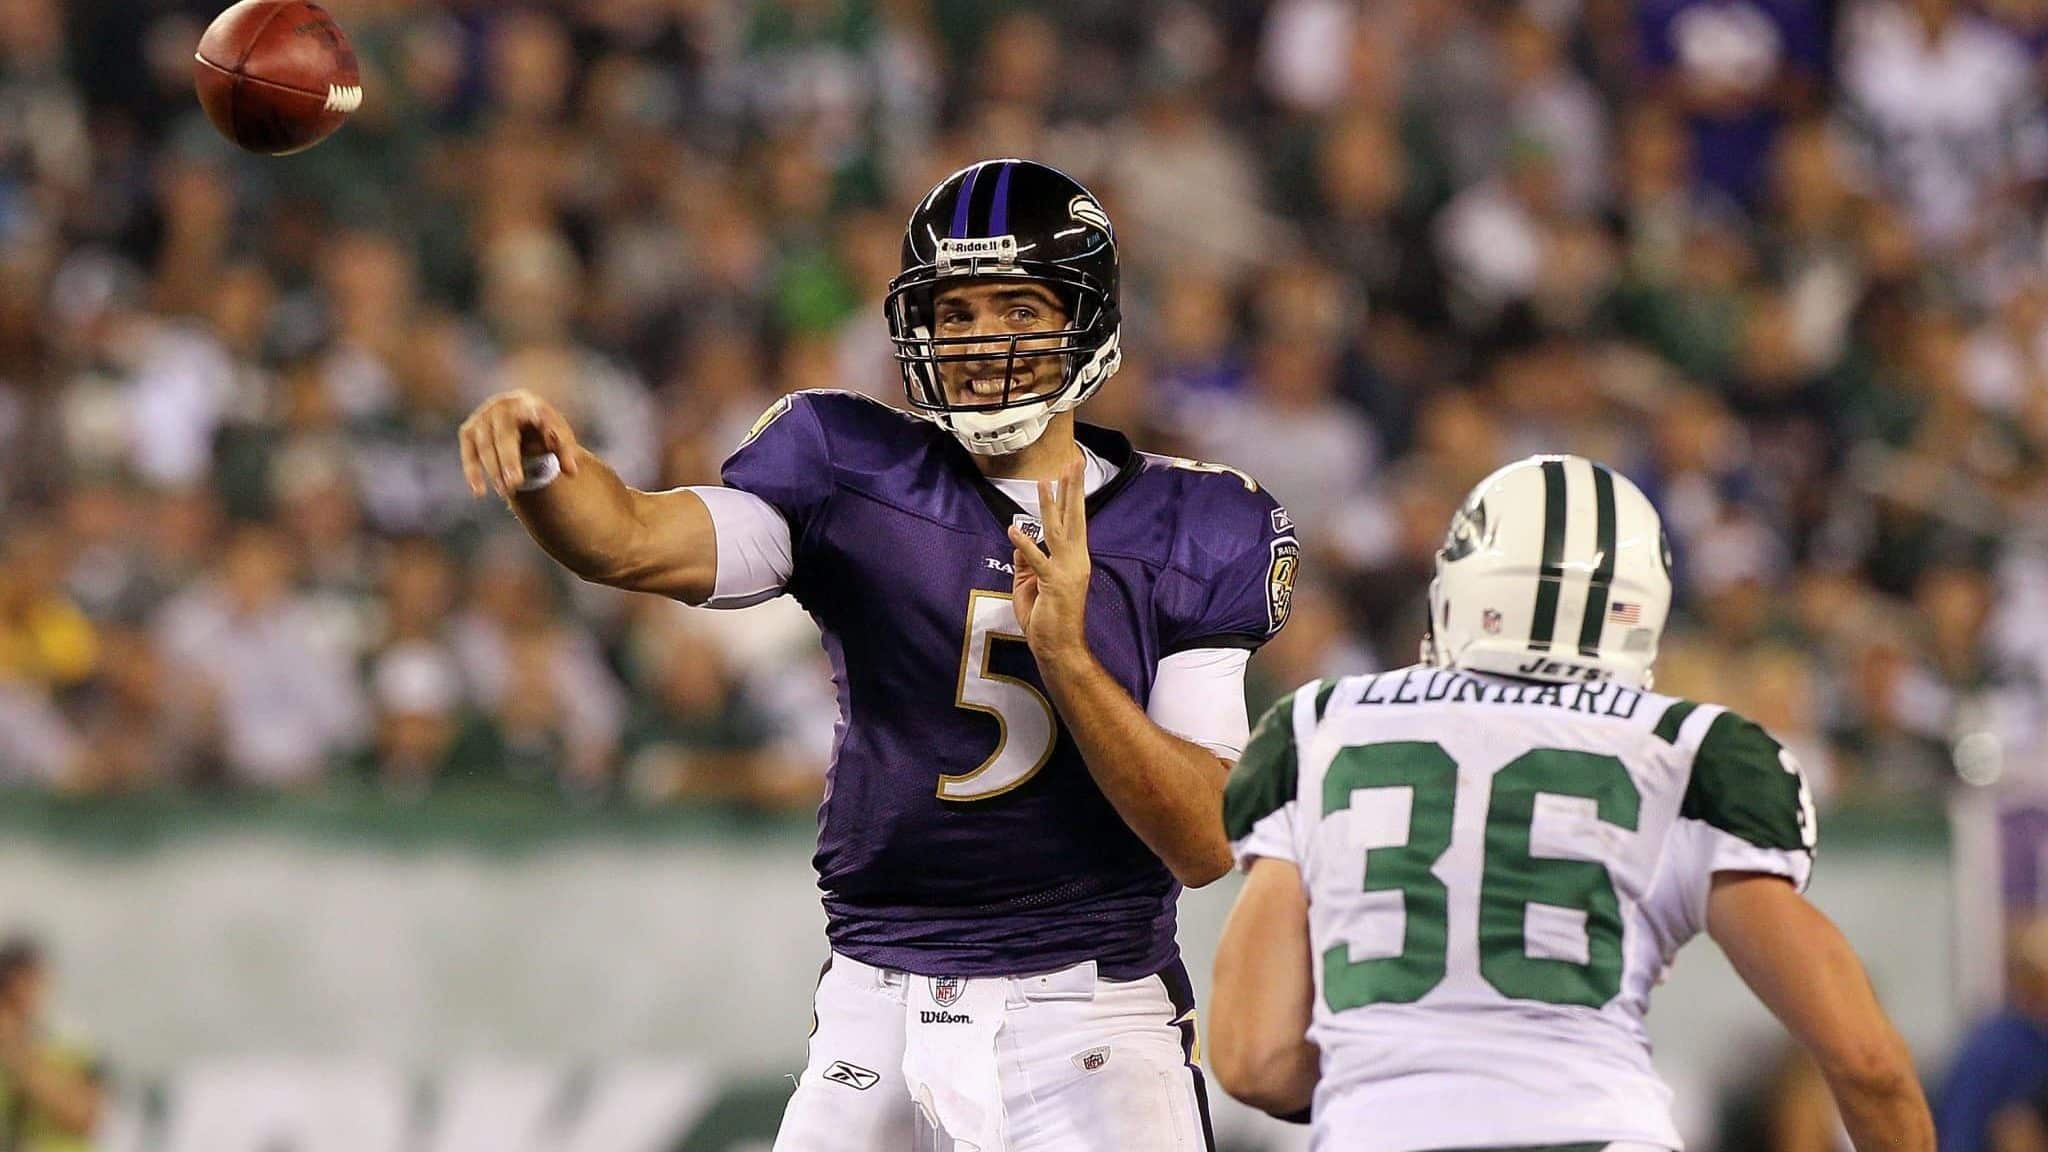 EAST RUTHERFORD, NJ - SEPTEMBER 13: Joe Flacco #5 of the Baltimore Ravens throws a pass against the New York Jets during the home opener at the New Meadowlands Stadium on September 13, 2010 in East Rutherford, New Jersey.